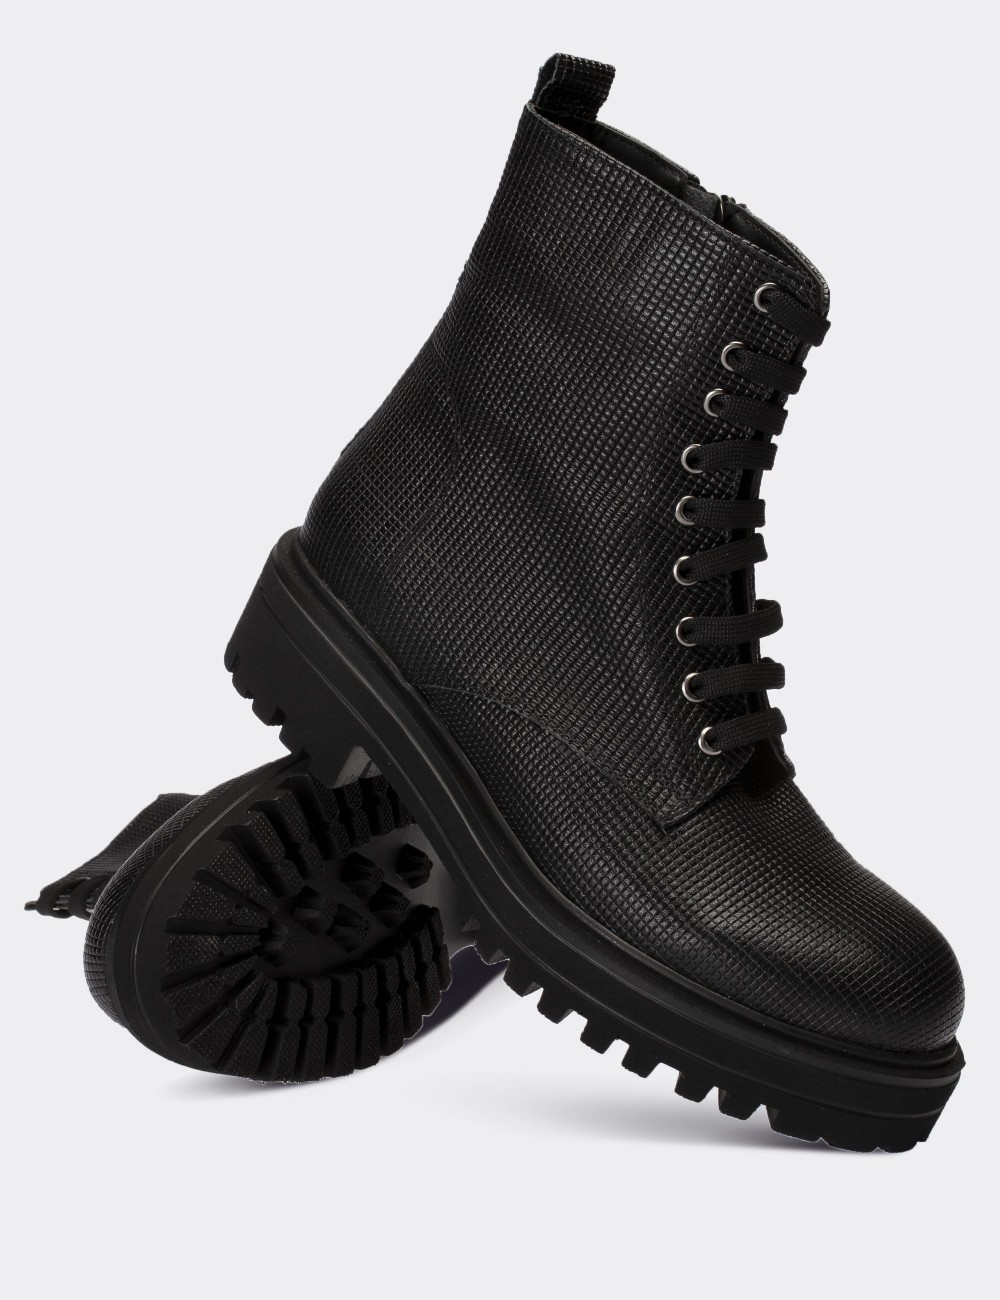 Black  Leather Boots - 01814ZSYHE14